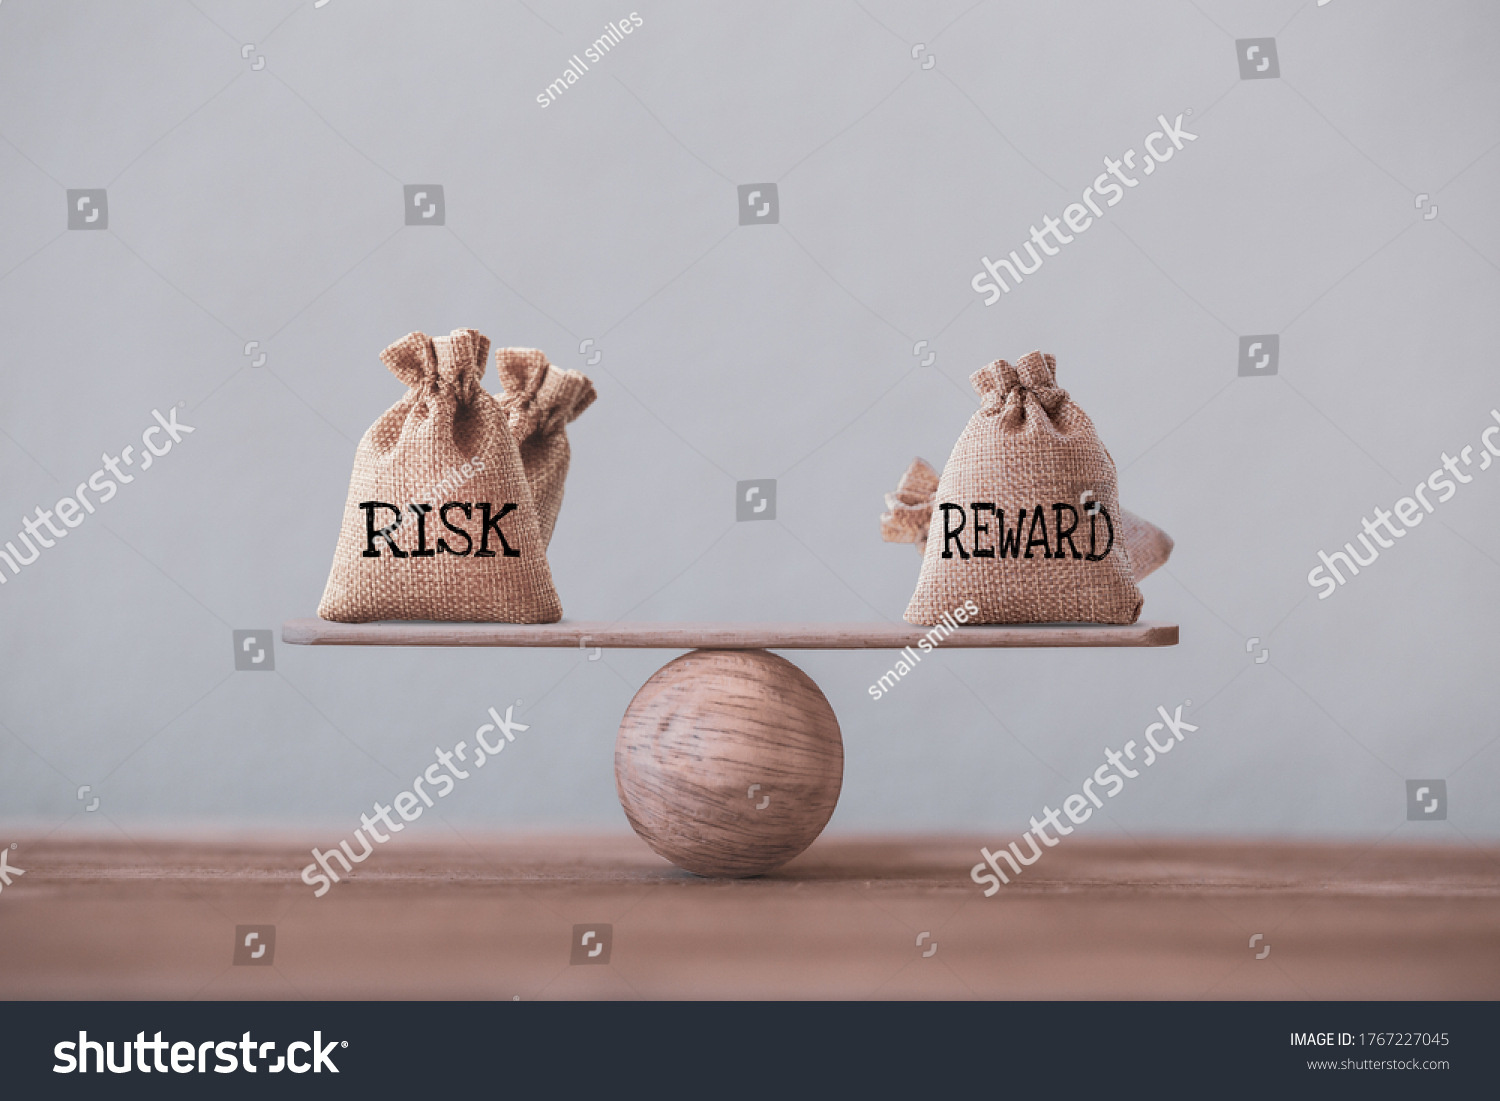 Risk and reward bags on a basic balance scale in equal position on wood table. risk management concept, depicts investors use a risk reward ratio to compare the expected return of an investment #1767227045